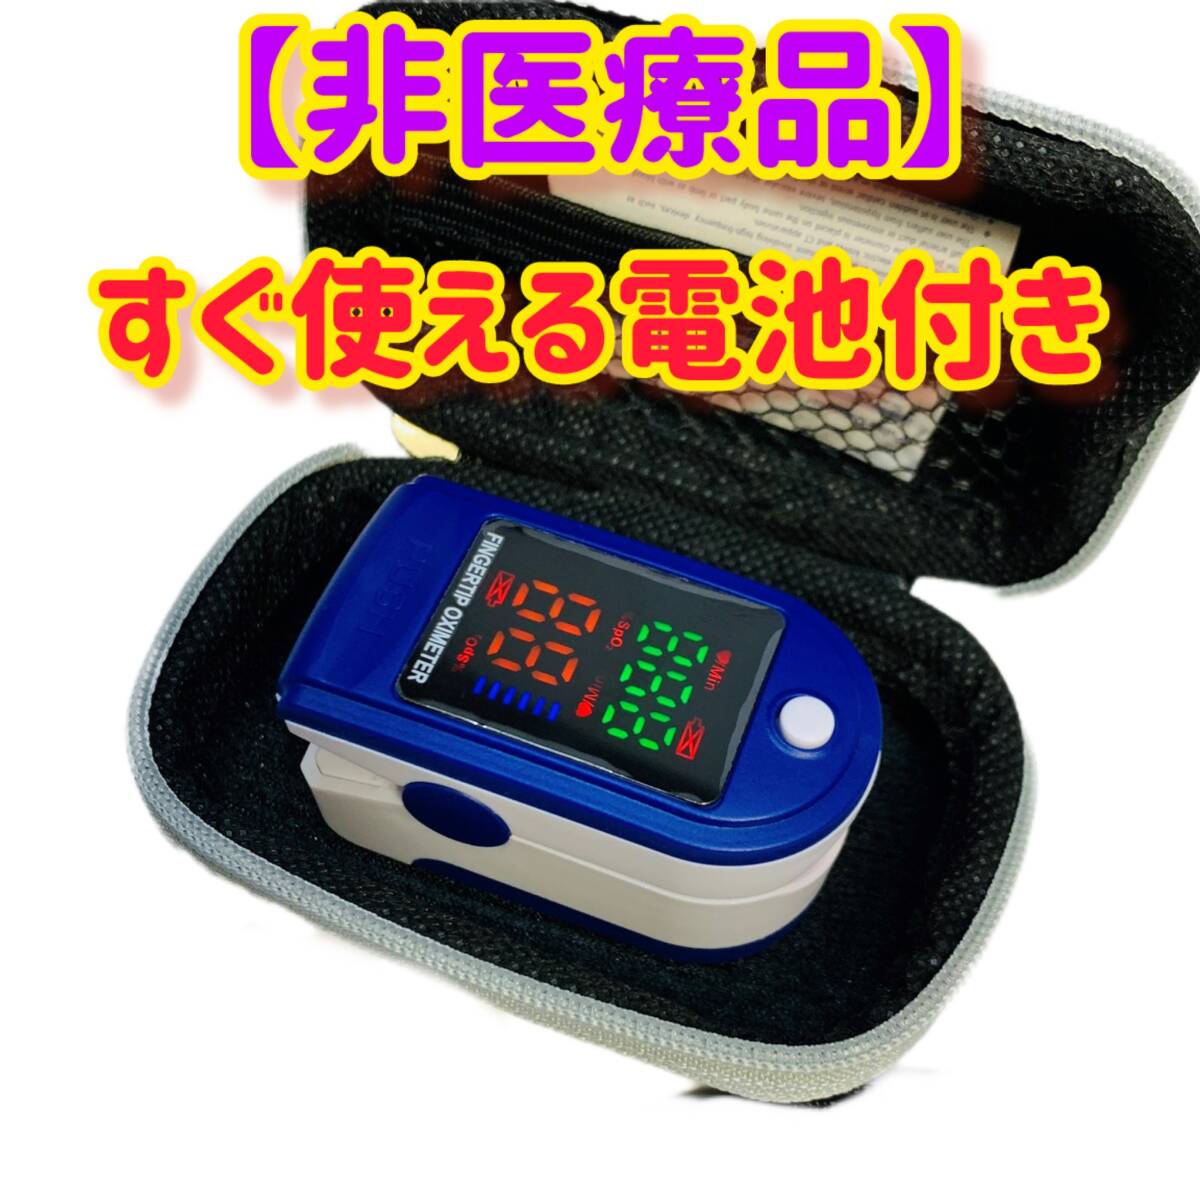 [ non medical care ] well nes equipment okisi meter with battery non medical care equipment . middle oxygen concentration total oxygen saturation degree .. total Heart rate monitor body style control lolp